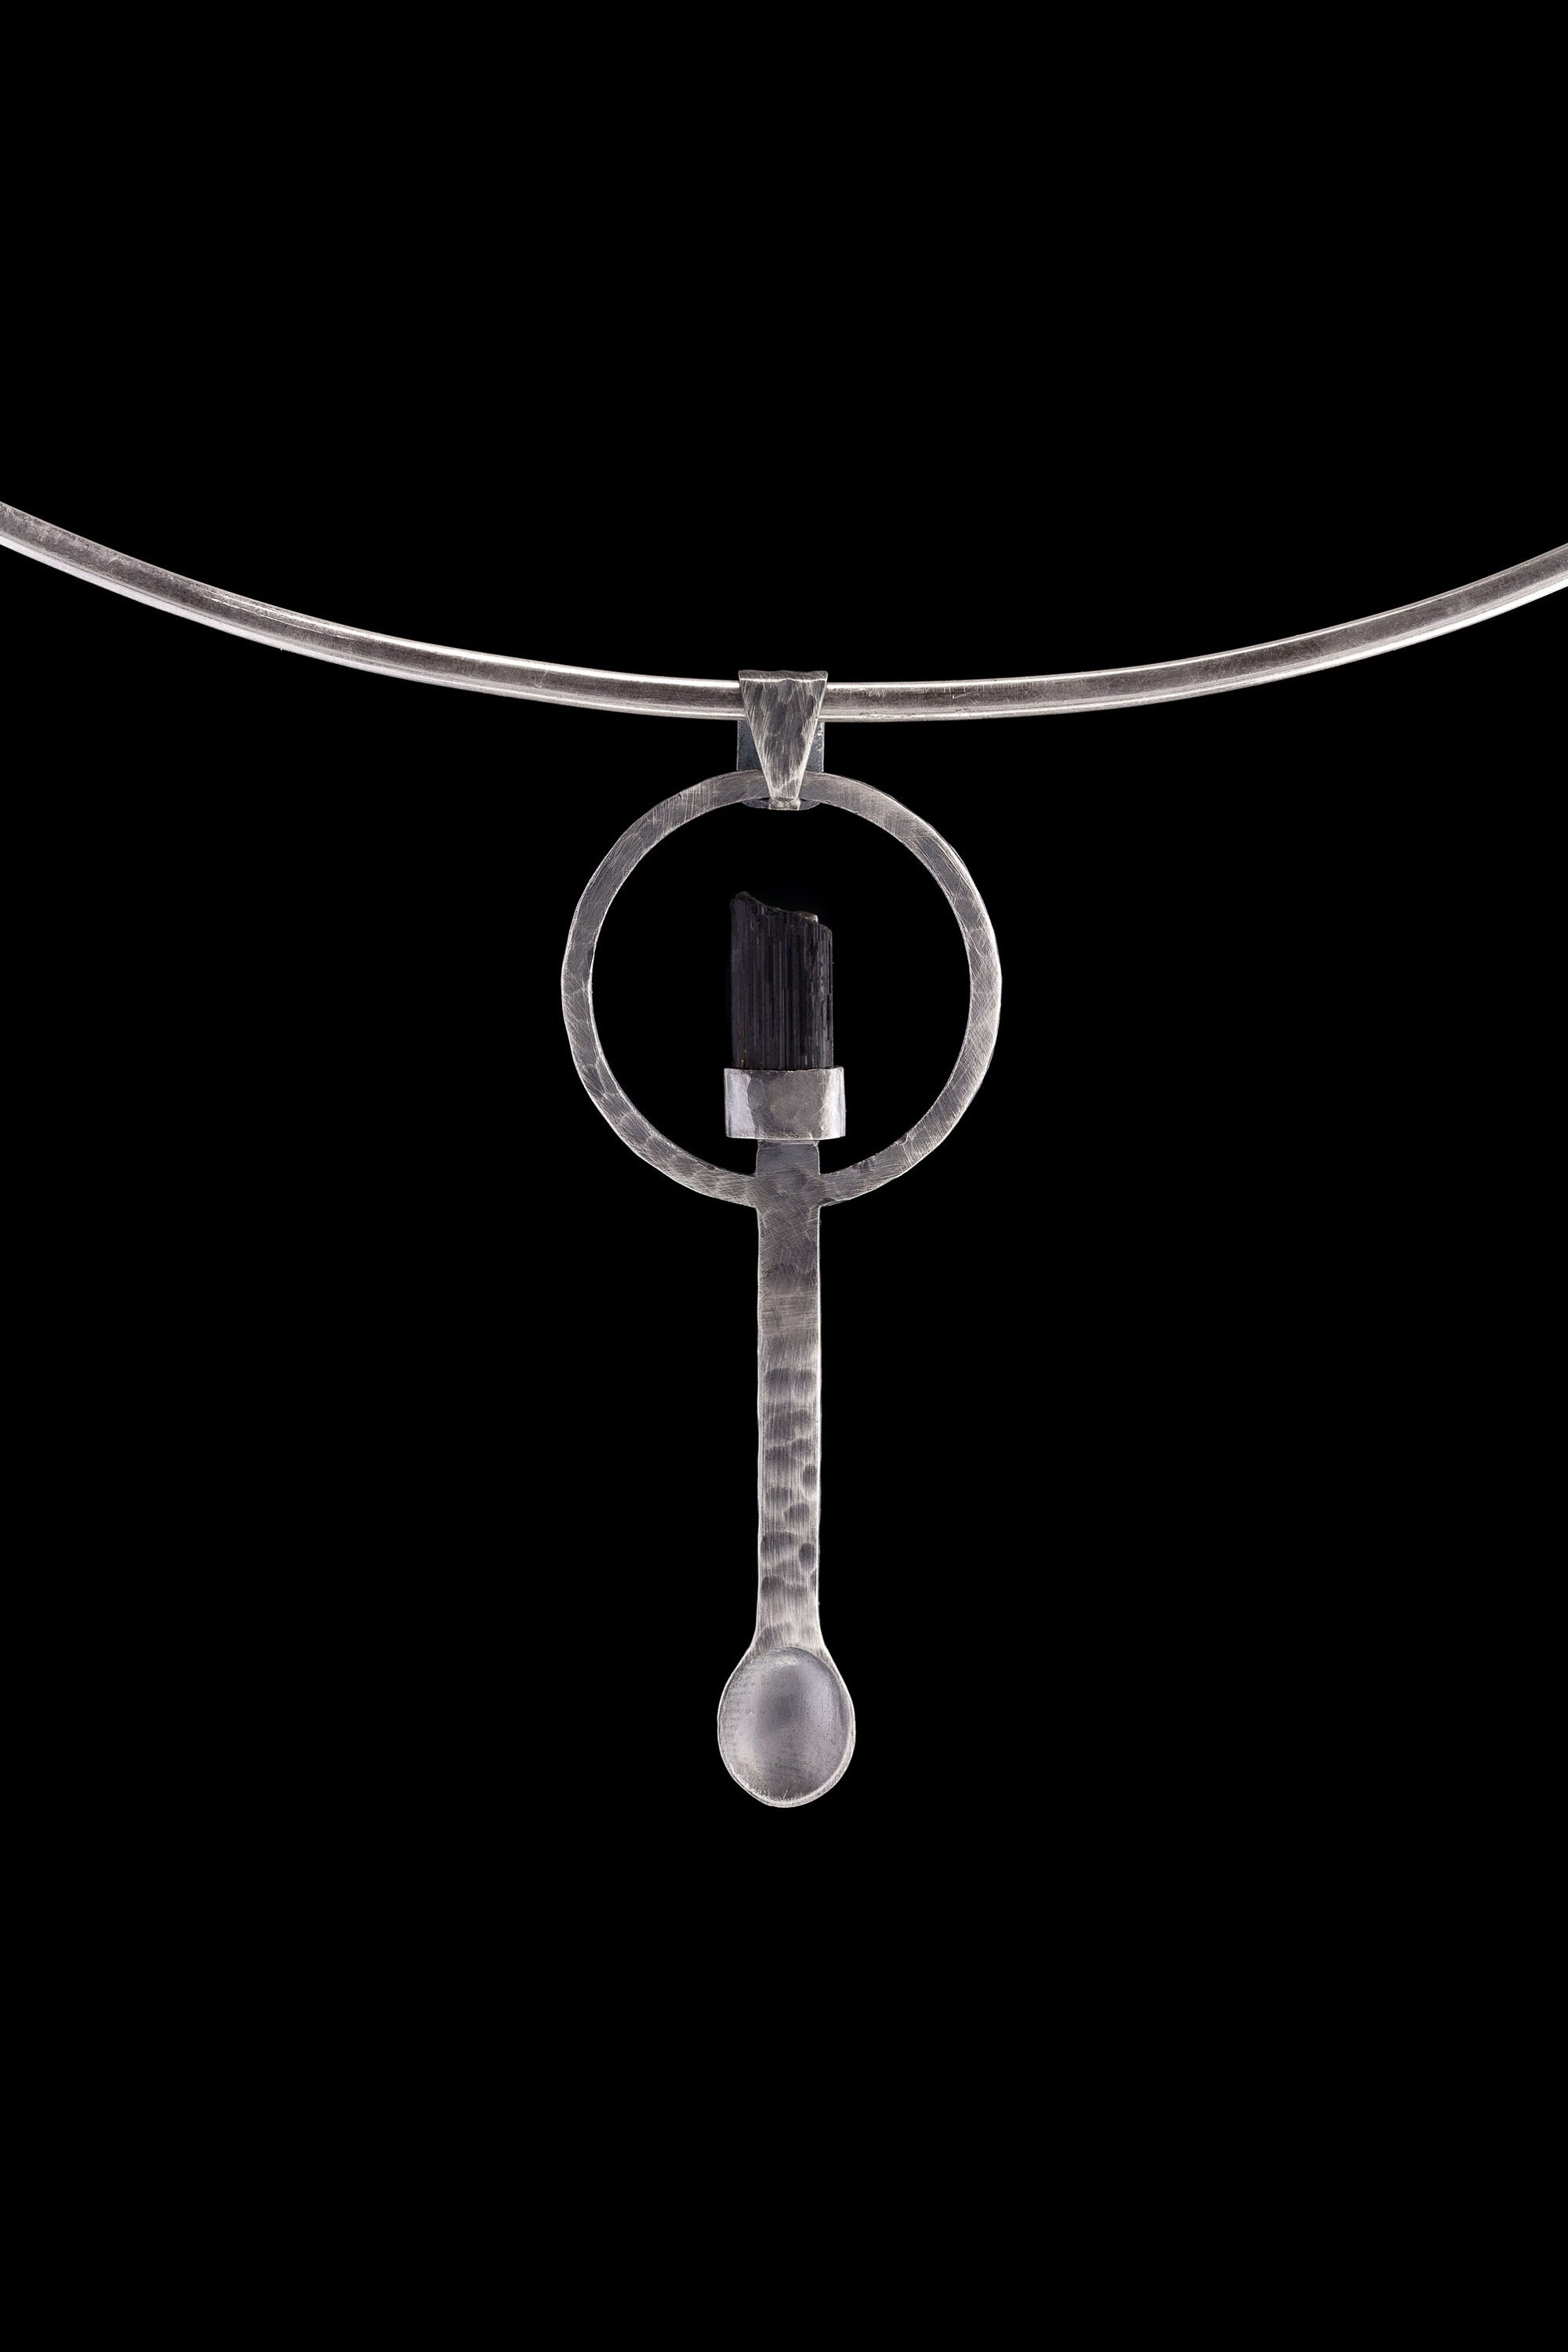 Black Tourmaline - Small Spice / Ceremonial Spoon - Solid 925 Cast Silver - Unique Hammer Textured - Crystal Pendant Necklace